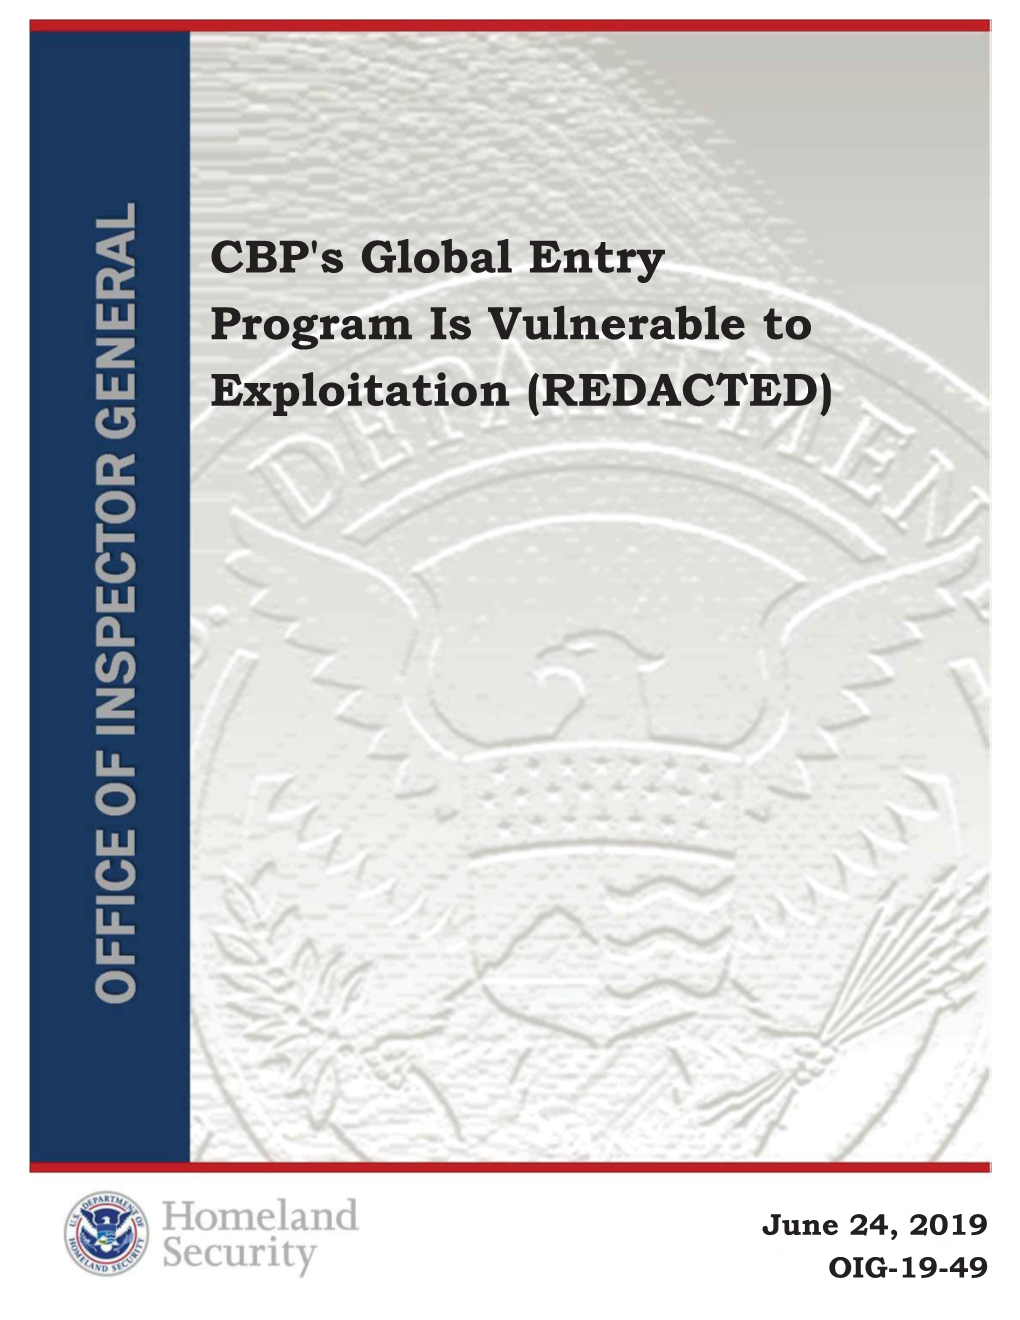 CBP's Global Entry Program Is Vulnerable to Exploitation (REDACTED)